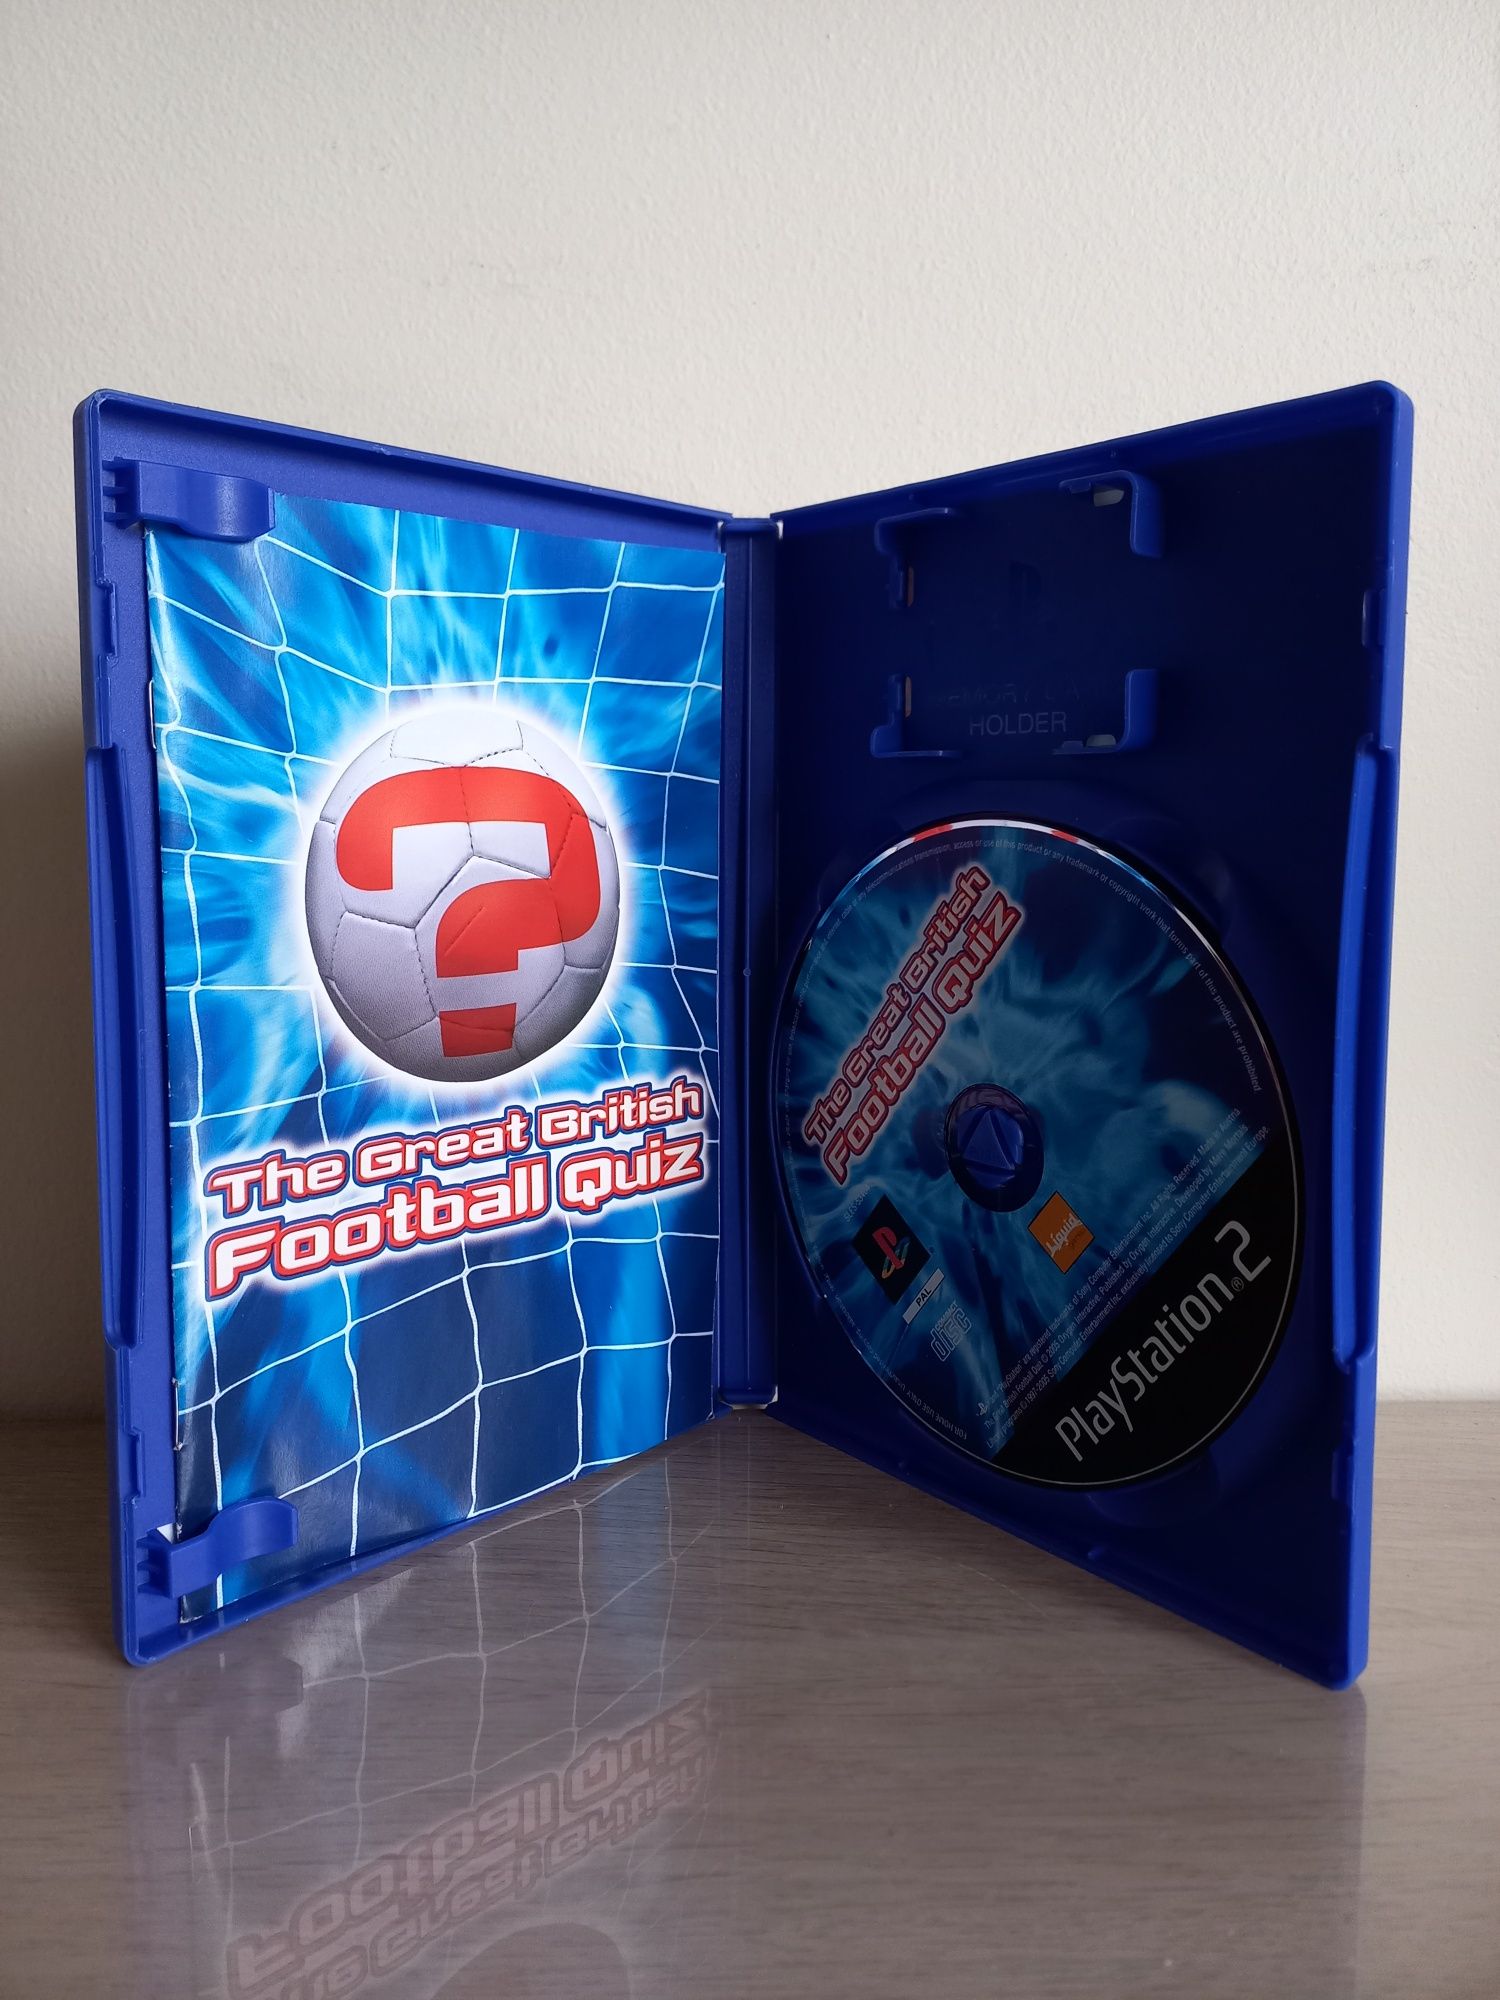 Jogo The Great British Football Quizz PS2